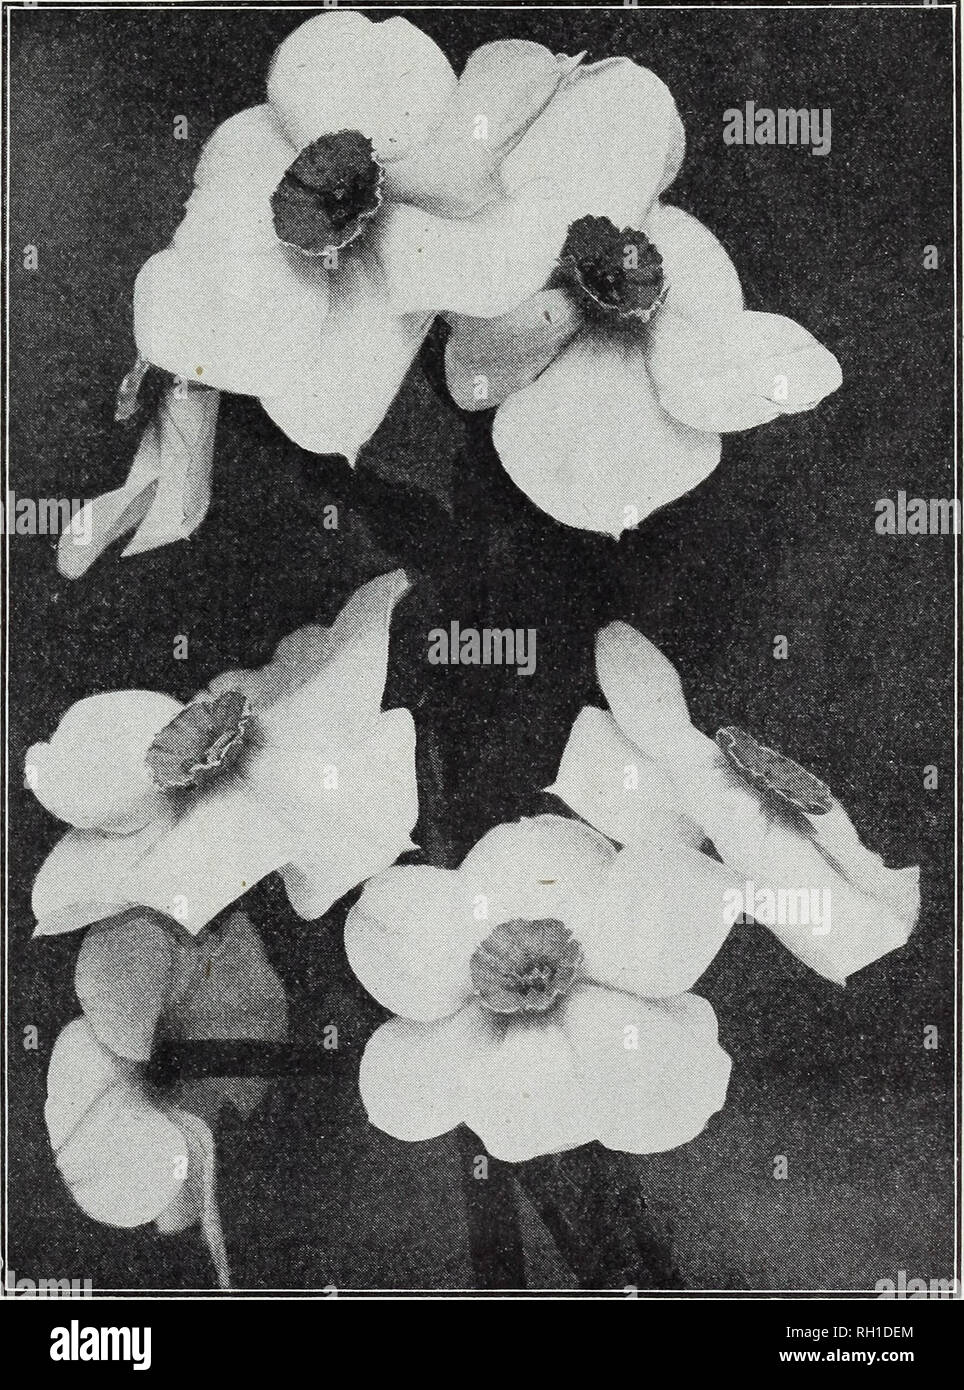 . Bulbs and seeds : autumn 1915. Seeds Catalogs; Bulbs (Plants) Catalogs; Vegetables Seeds Catalogs. M. FERRY &amp; CO., DETROIT, MICH. 13 DOUBLE NARCISSUS (daffodid These hardy double daffodils are much in demand for outdoor bedding and borders and with the ex- ception of Albus Plenus Odoratus they succeed well for indoor forcing. All are fine for cutting. EACH DOZ Incomparable [Butter and Eggs) Large very double flowers, light yellow and orange, fra- grant, splendid for winter cut flowers or out of doors. ^1.50 per 100 3 Orange Phoenix {Eggs and Bacon) Creamy white and orange, large petals.  Stock Photo